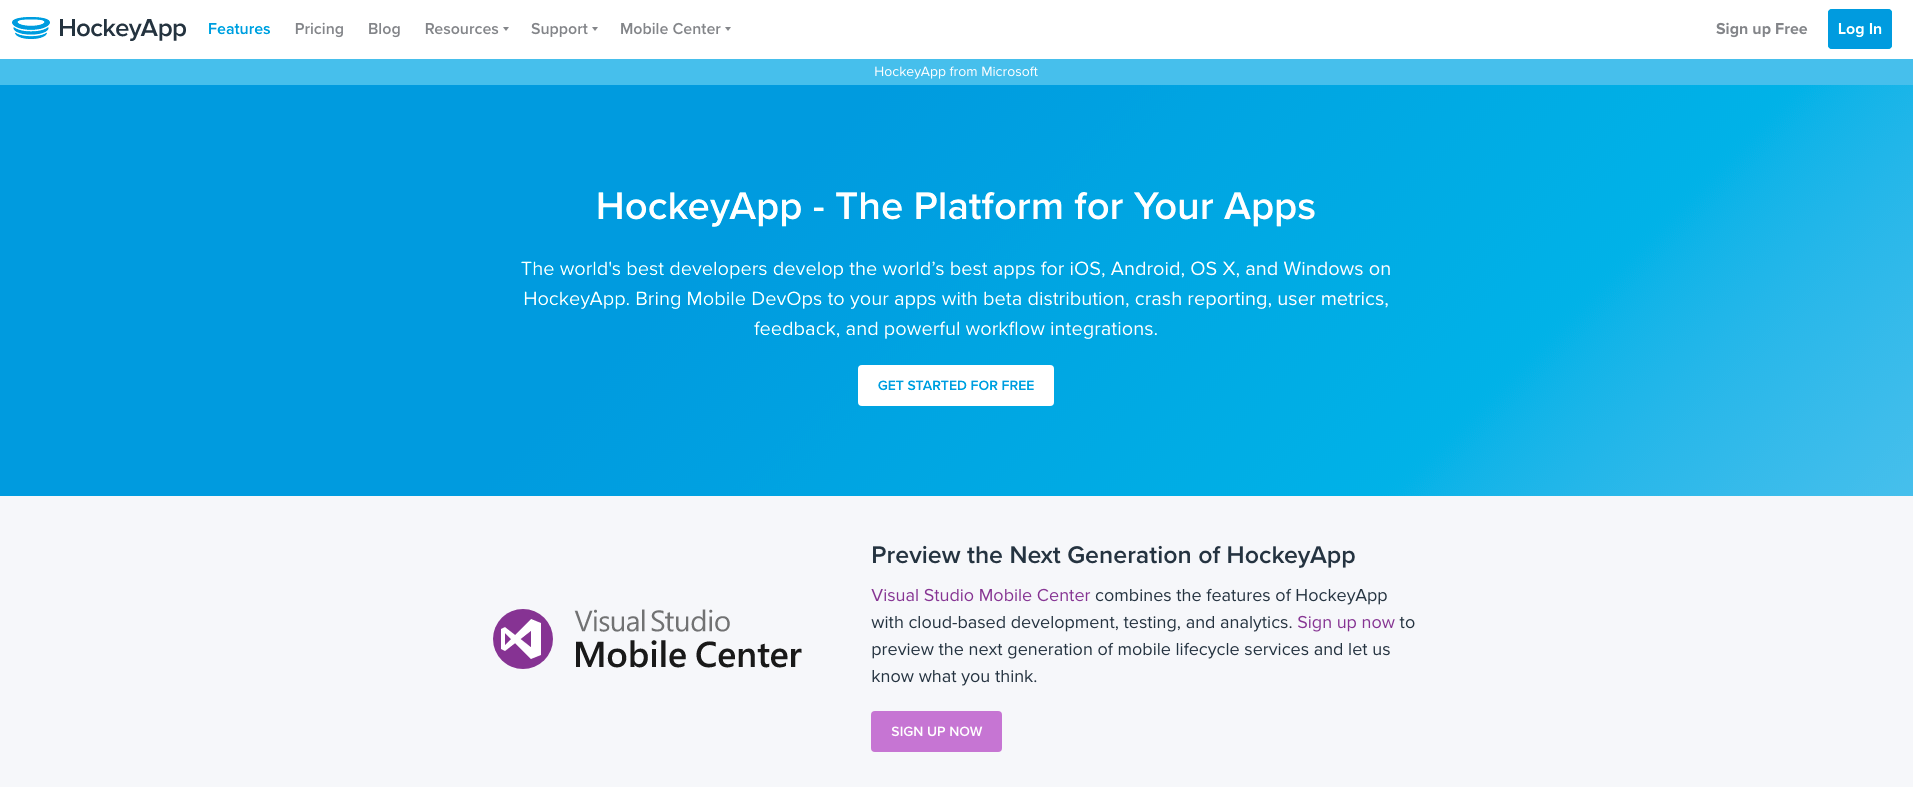 HockeyApp is moving along to Mobile Center